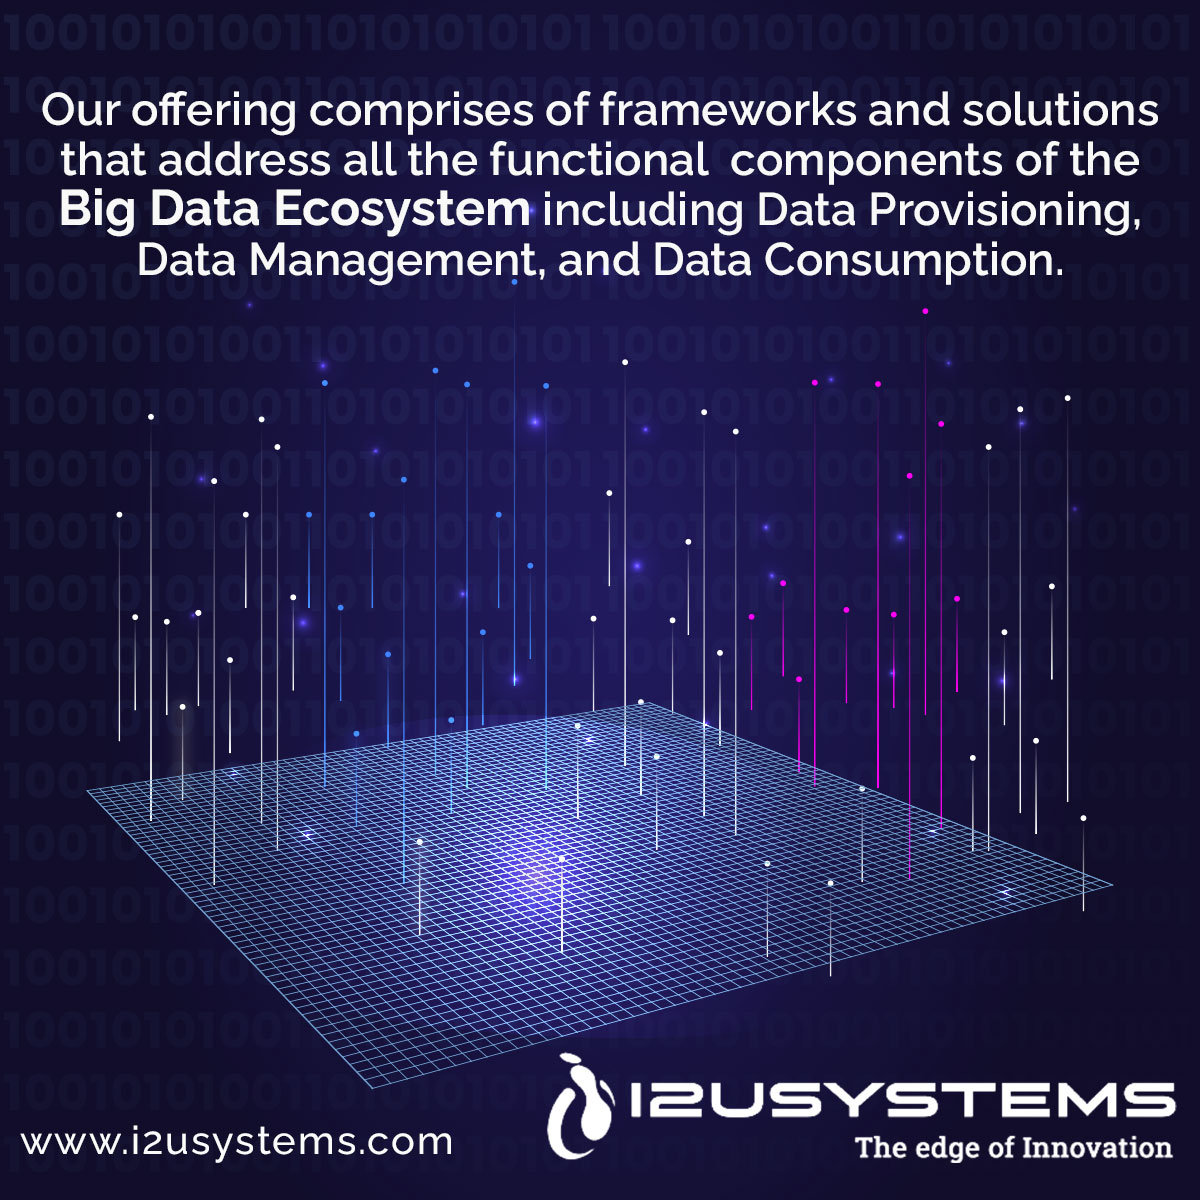 Our offering comprises of frameworks and solutions that address all the functional components of the Big Data Ecosystem including Data Provisioning, Data Management, and Data Consumption.

#i2usystems #c2crequirements  #datamanagement #bigdata #ecosystem #data #dataconsumption